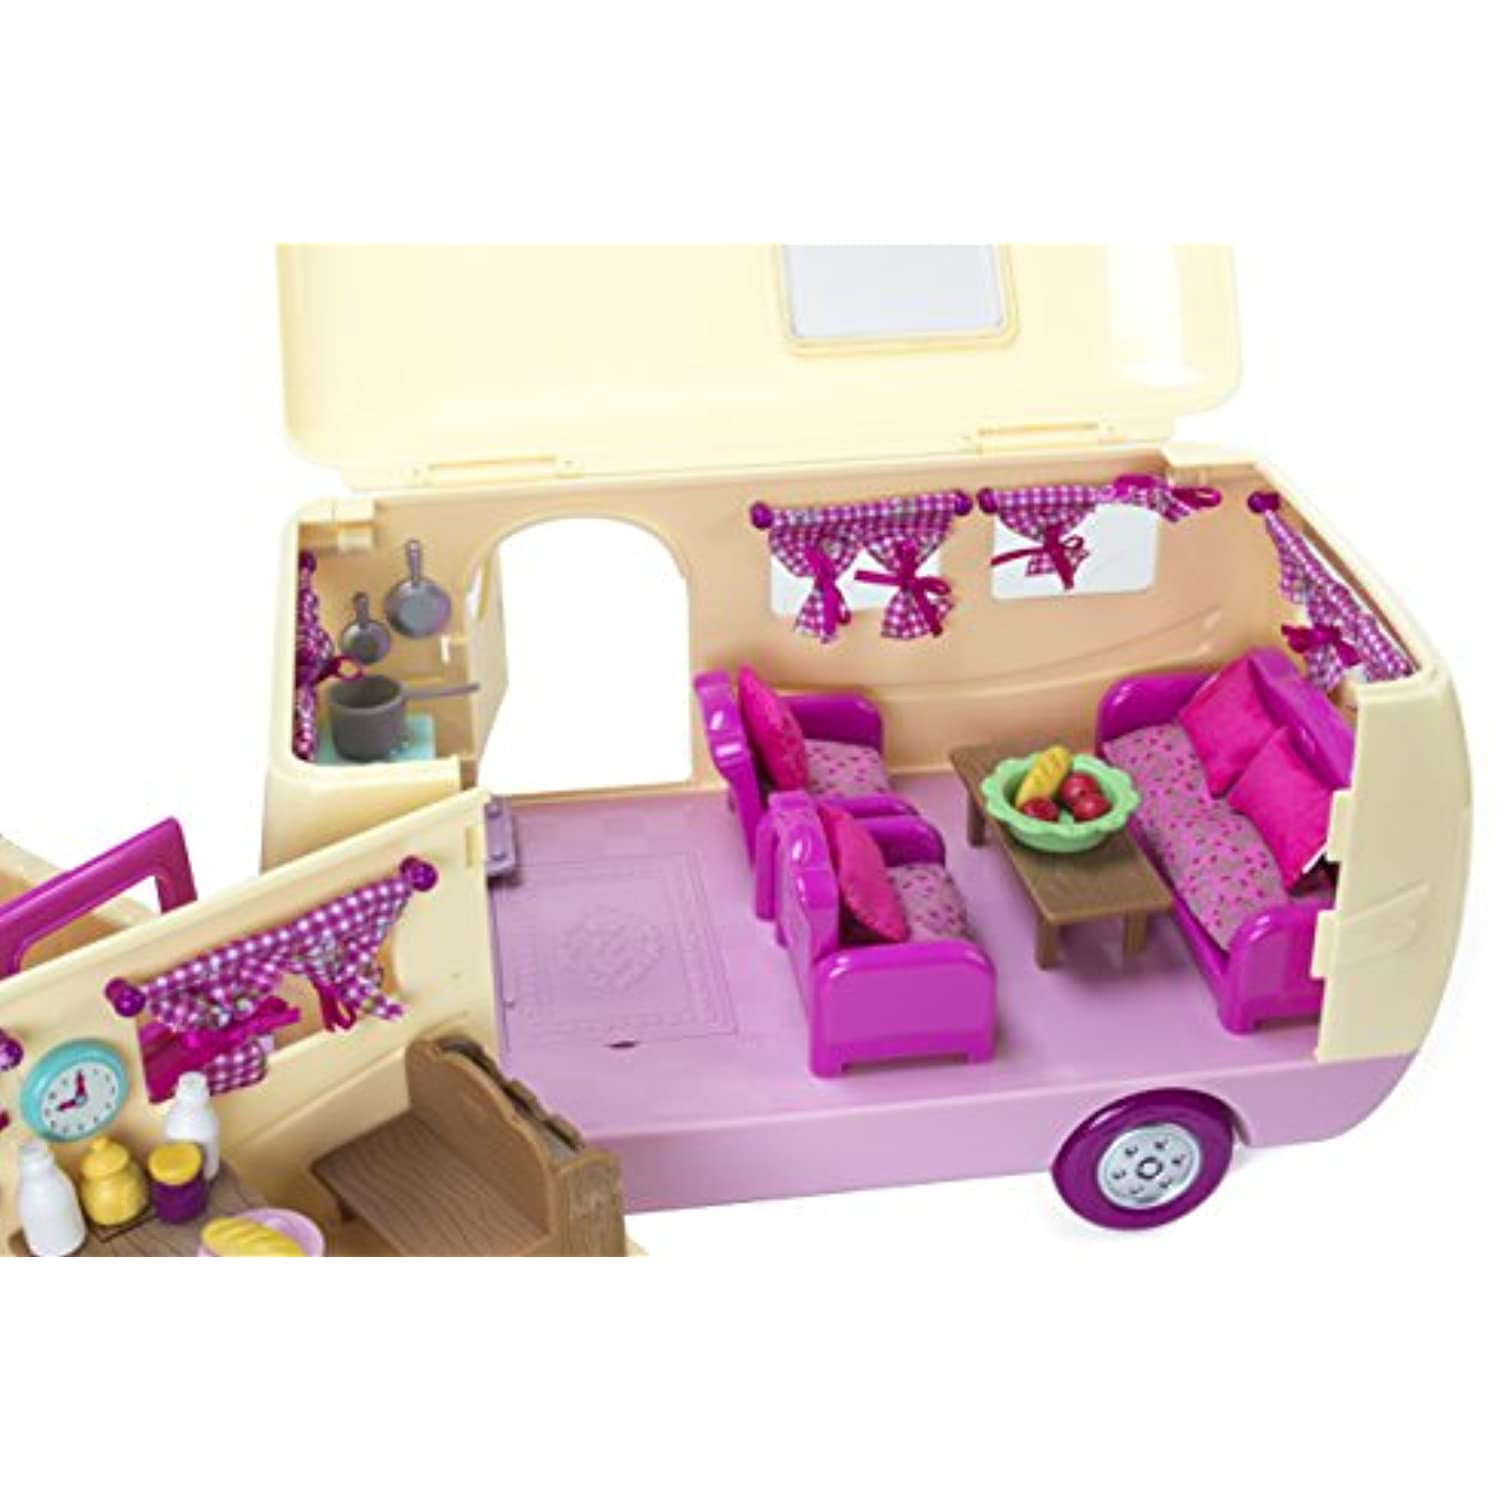 and 38 Interactive Accessories Lil Woodzeez Happy Camper Playset with Car Camper